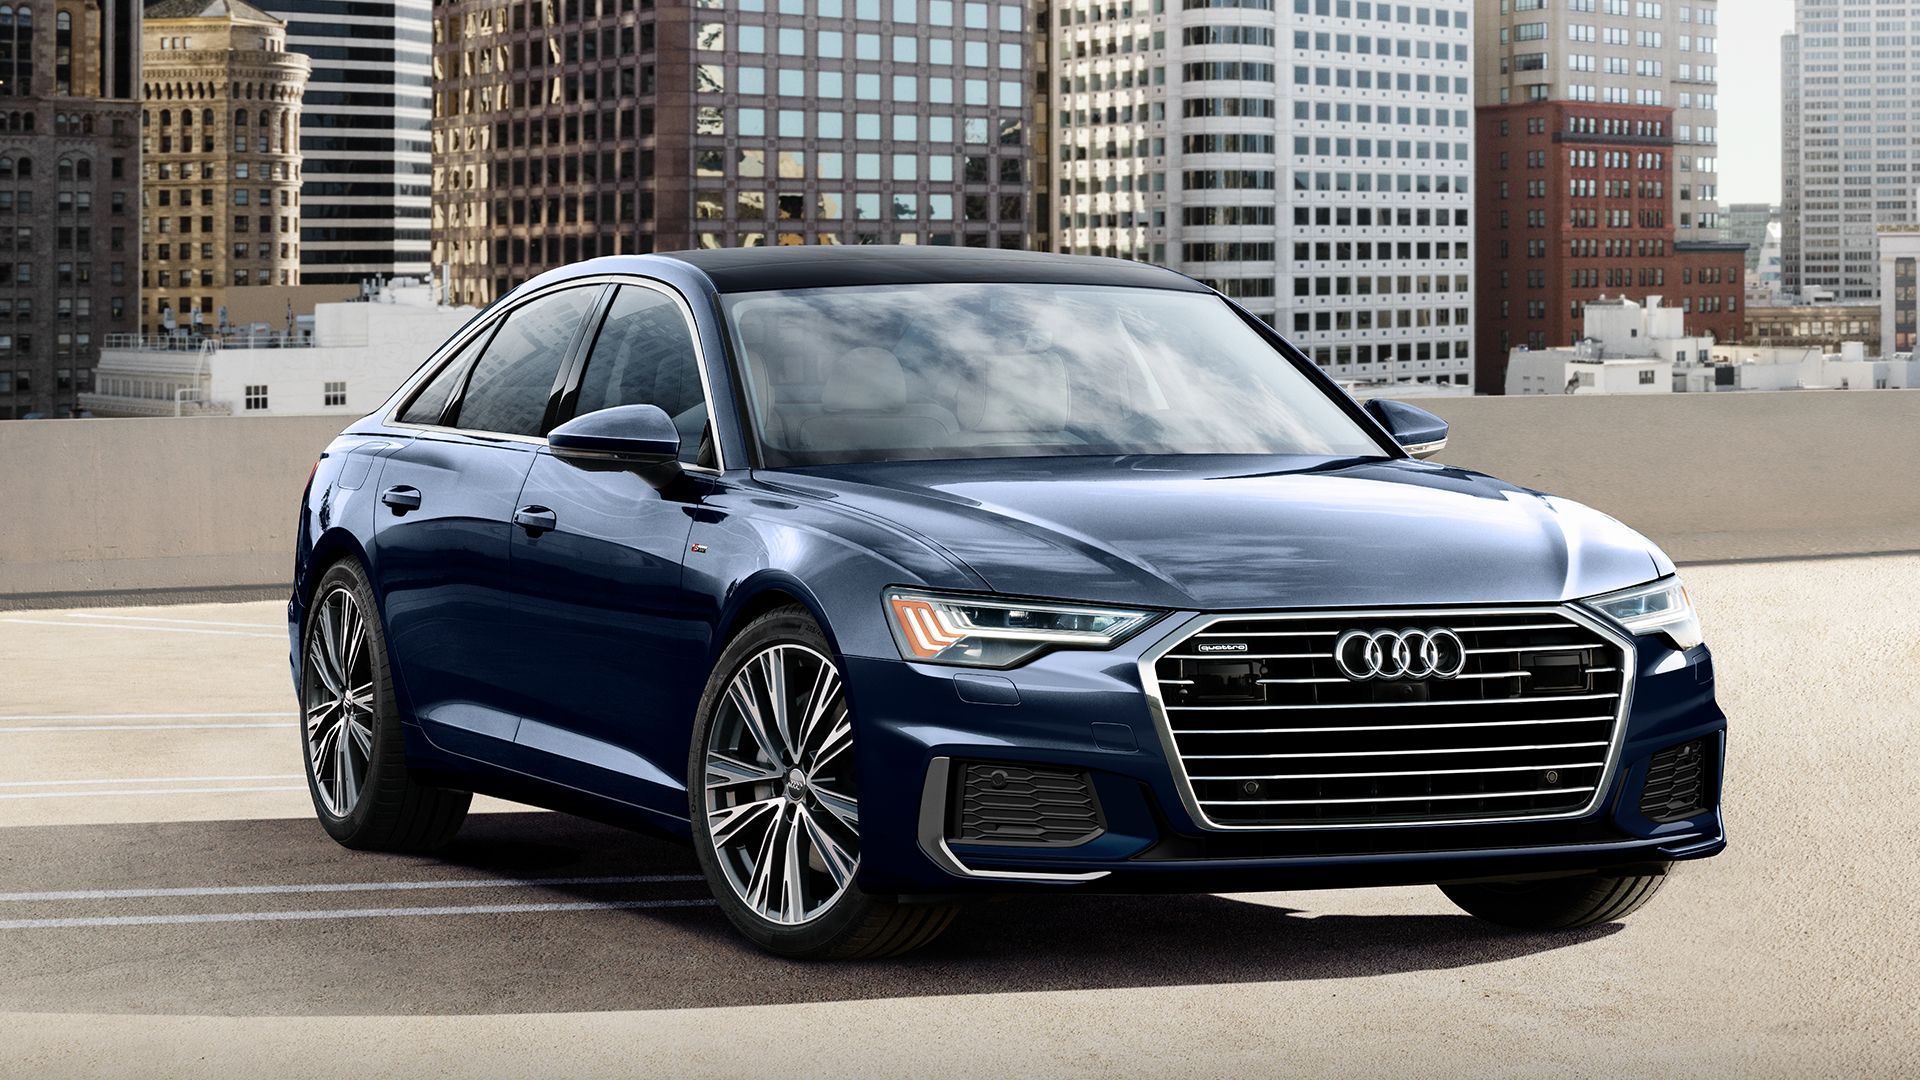 Audi A6 Review, Pricing, and Specscaranddriver.com